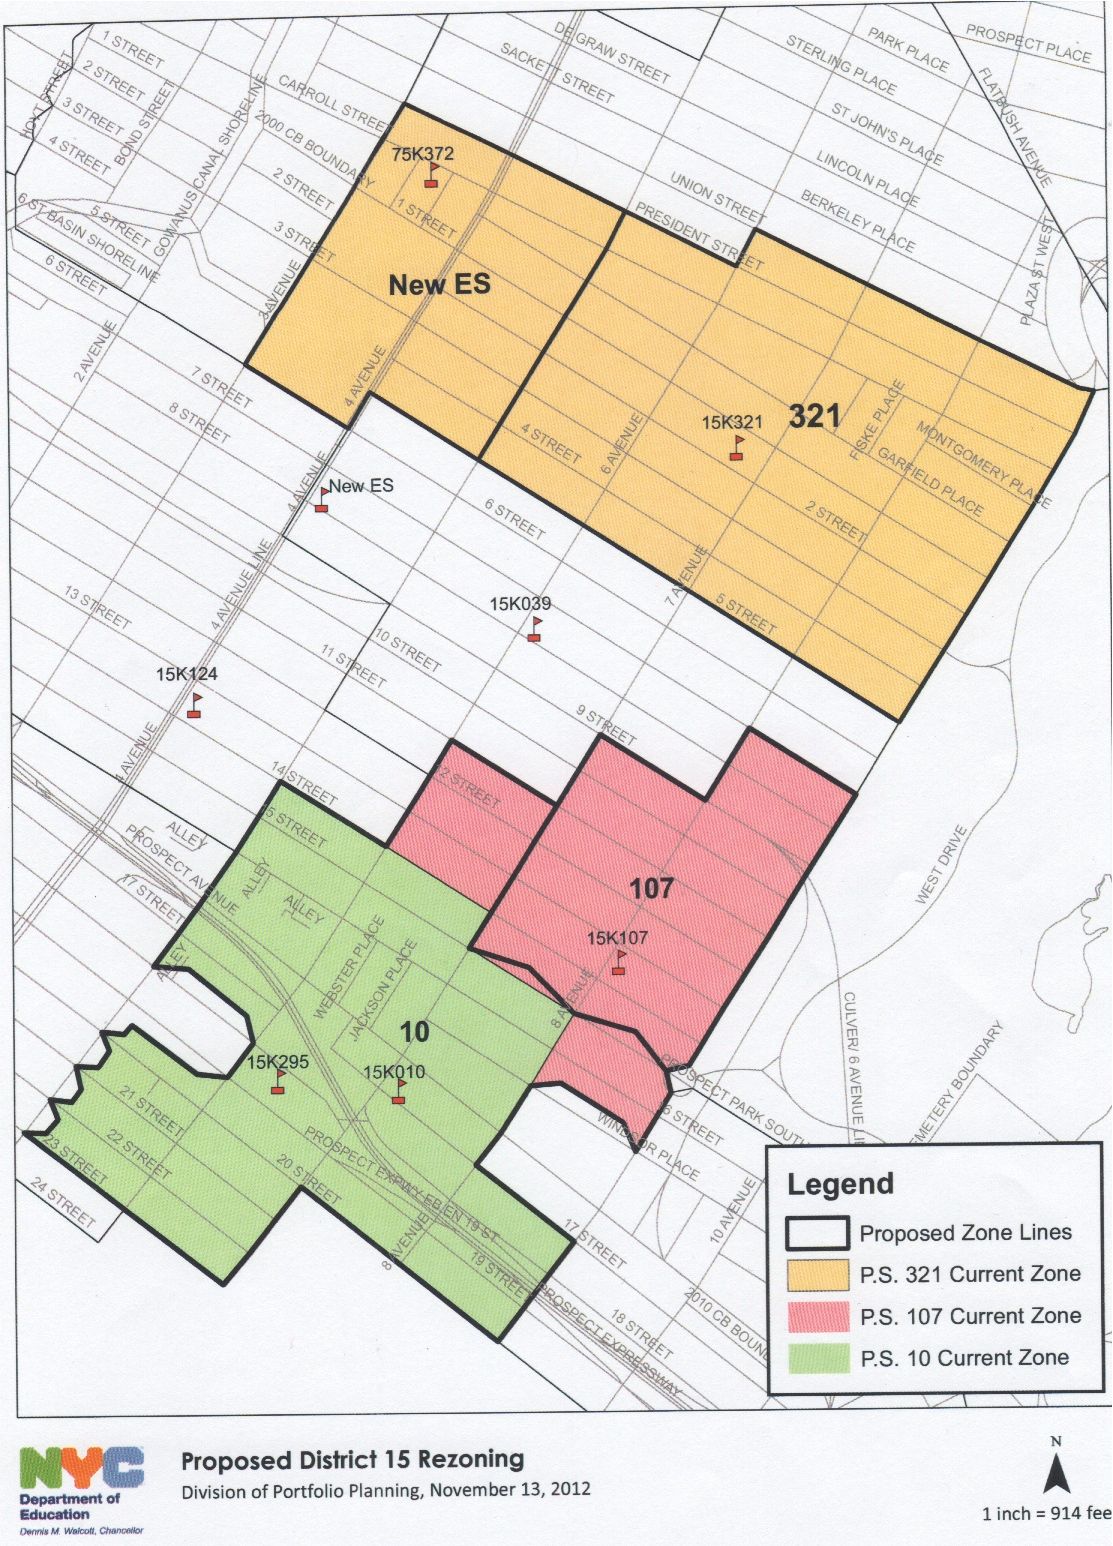 Still Have Questions About Rezoning? The DOE Has Answers